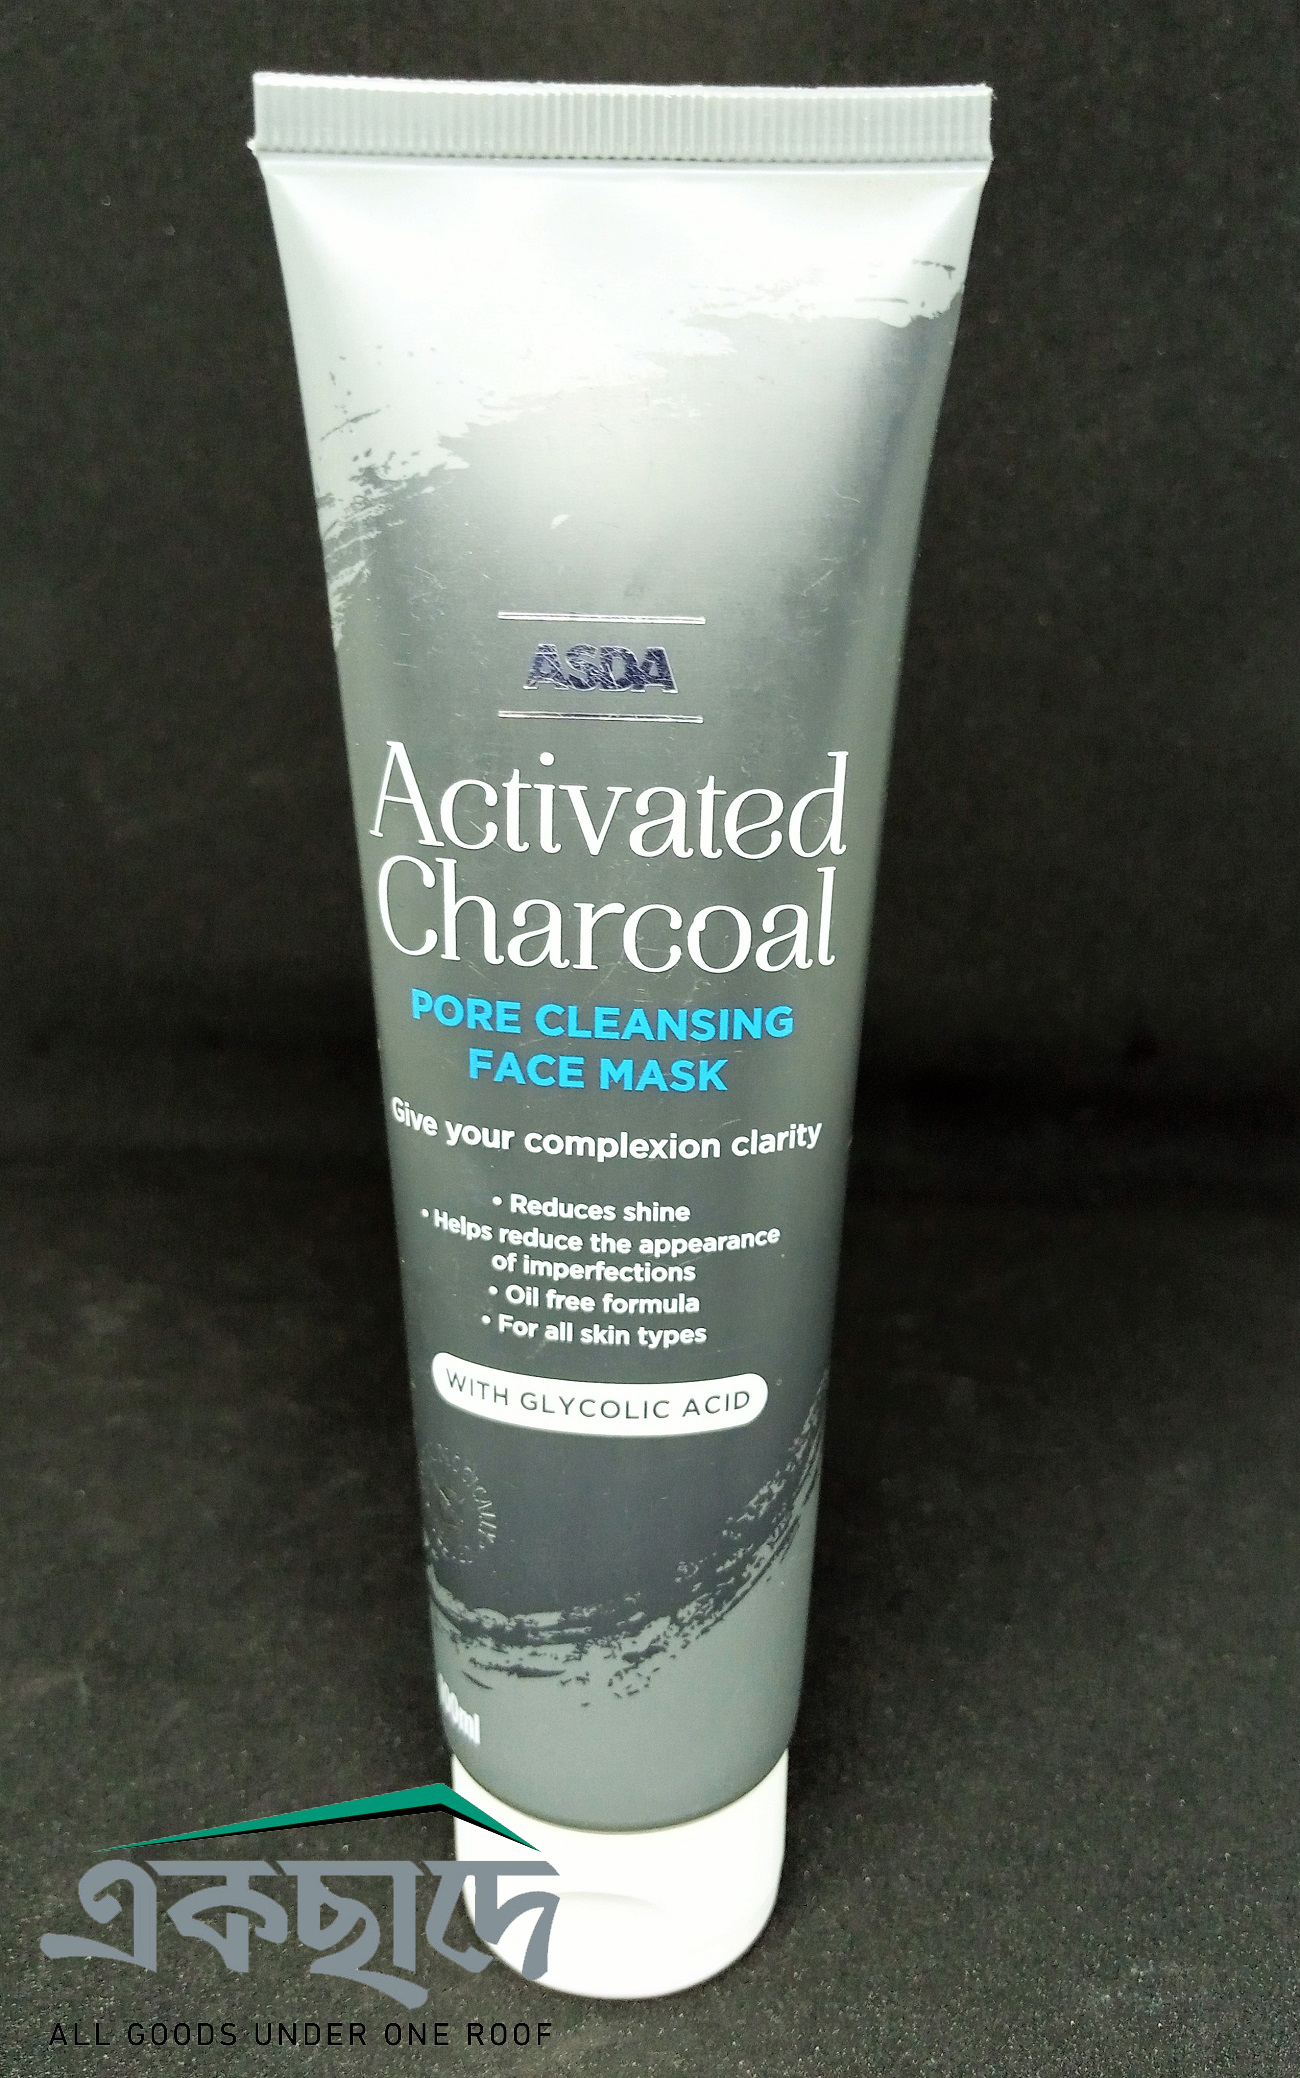 ASDA (UK) ACTIVATED CHARCOAL PORE CLEANSING FACE MASK 100 ML